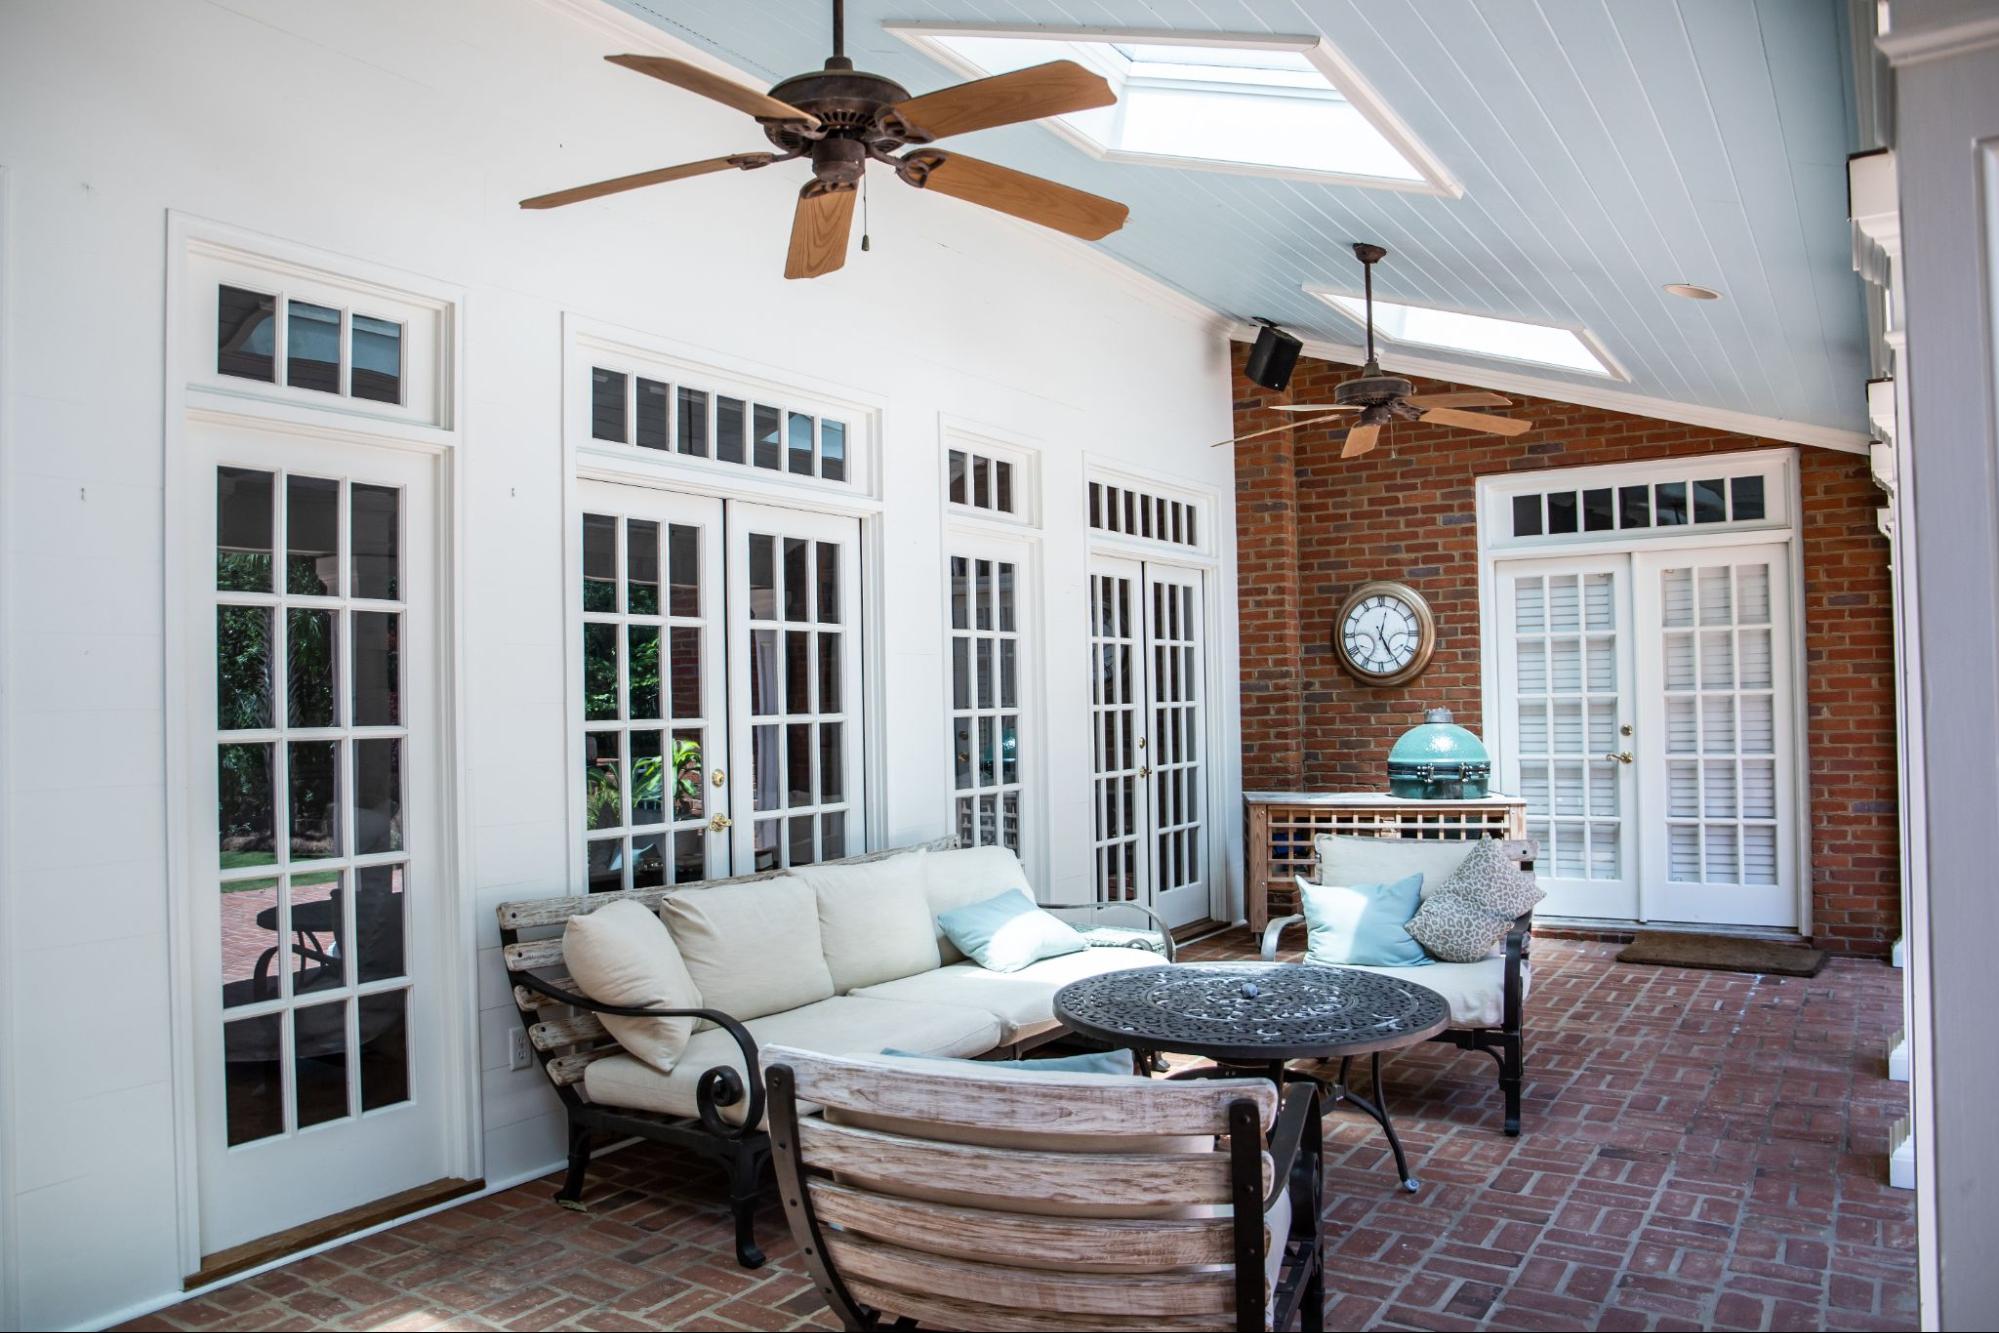 How to choose the right ceiling fan for your living space